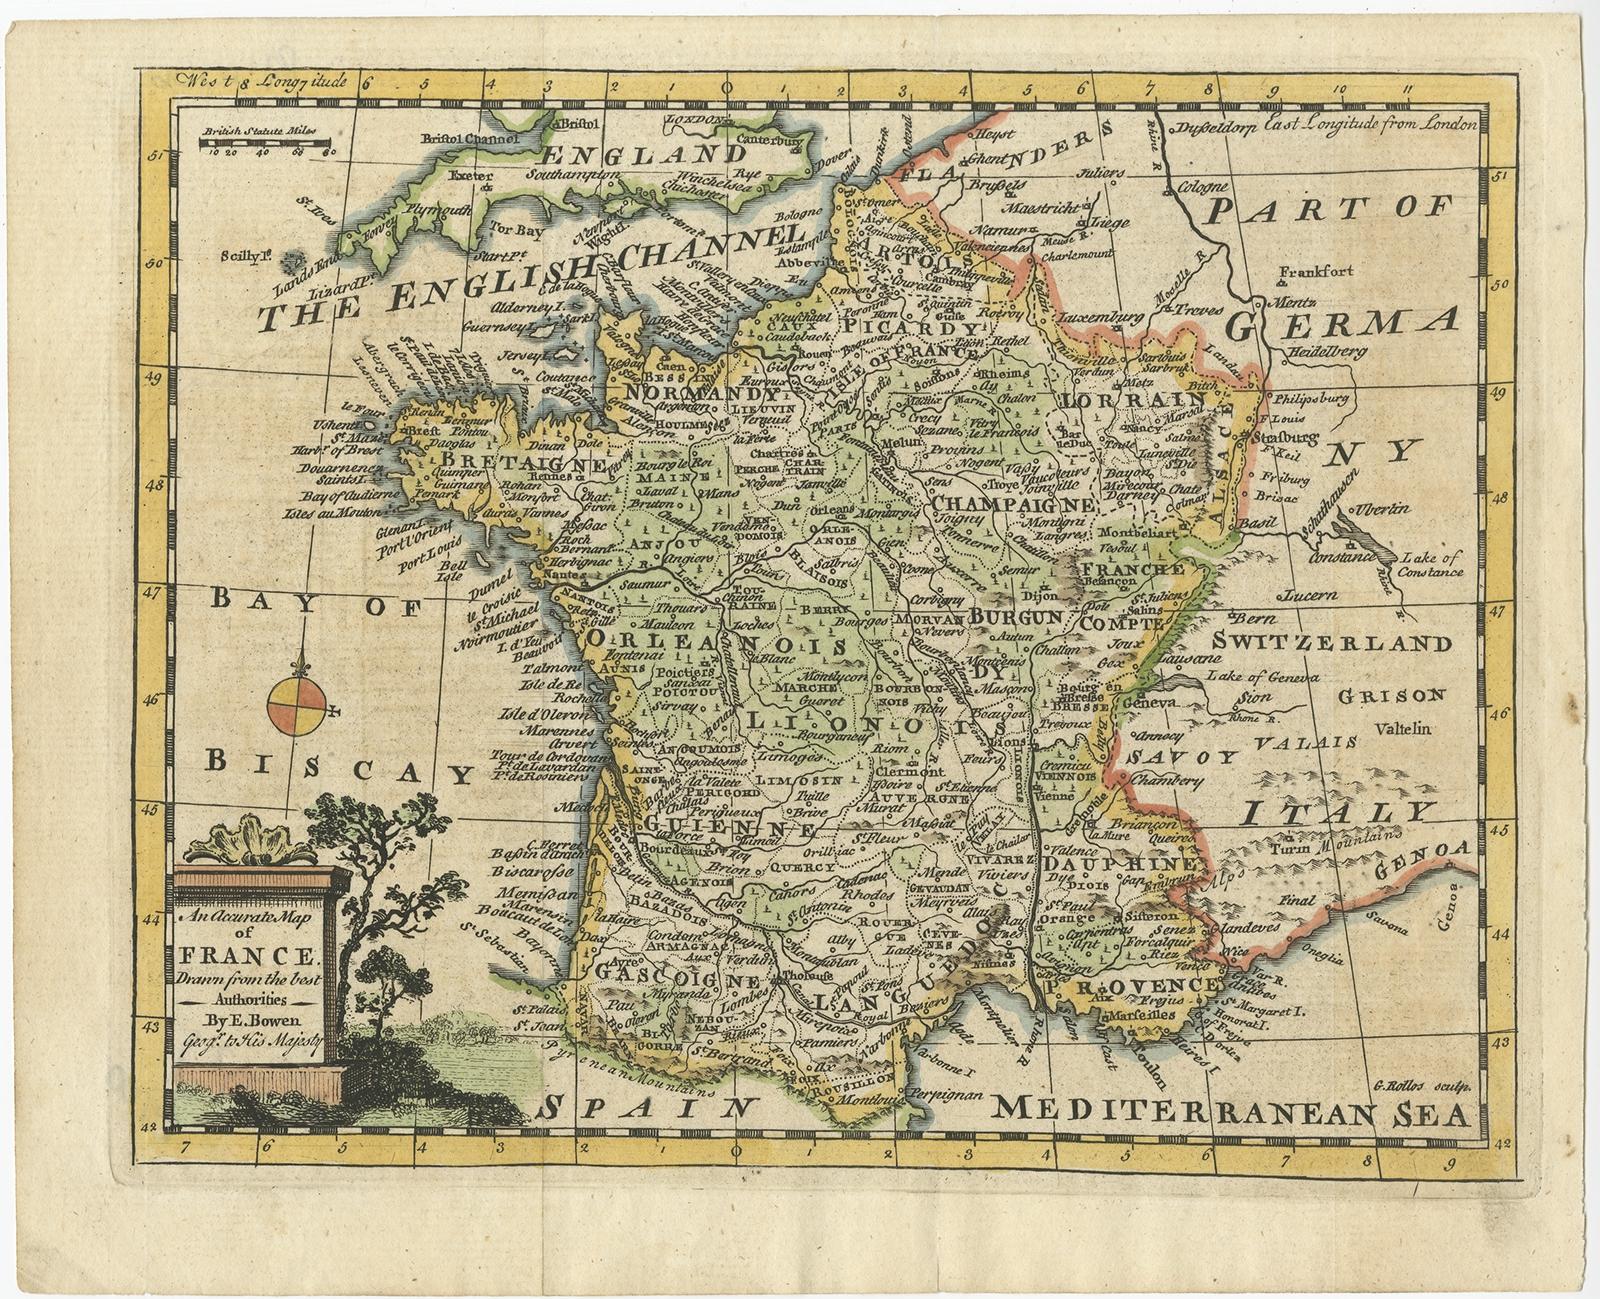 Antique map France titled 'An Accurate Map of France drawn from the best authorities'. 

Small, detailed map of France. With decorative title cartouche.

Artists and Engravers: Emanuel Bowen (1694?-1767) was a British engraver and print seller.